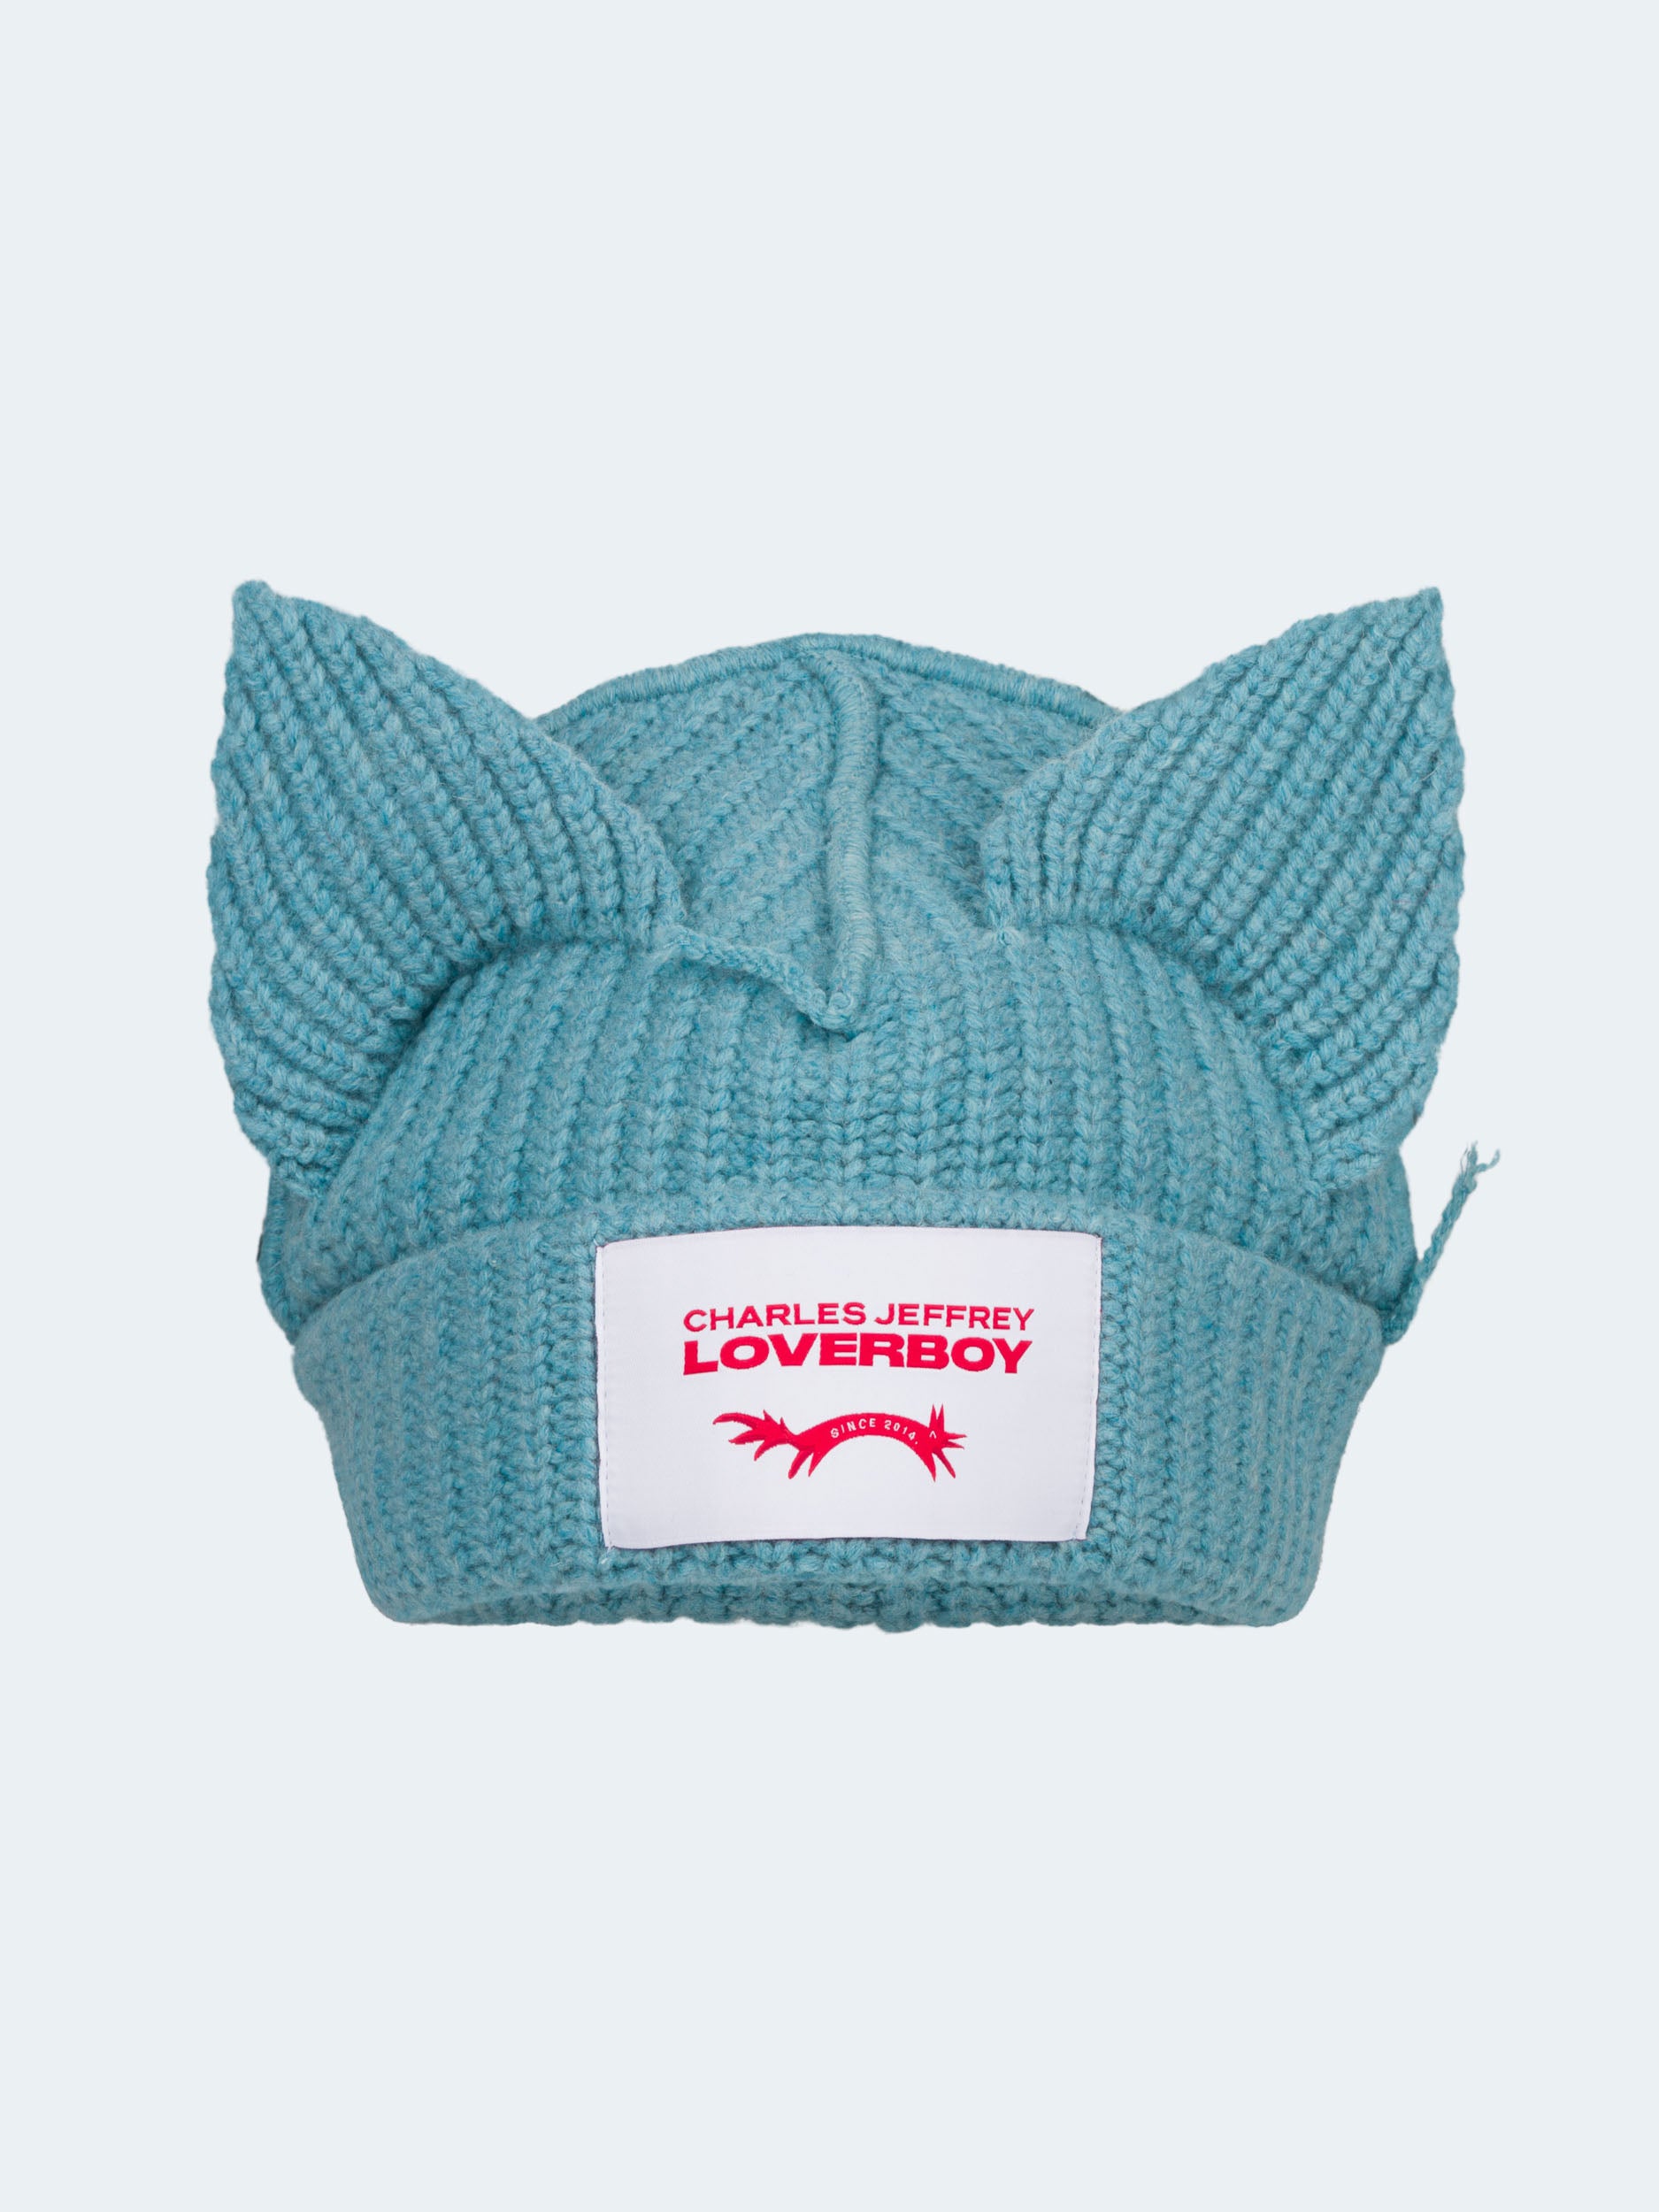 Hats and Chunky Beanies with ears | Charles Jeffrey Loverboy